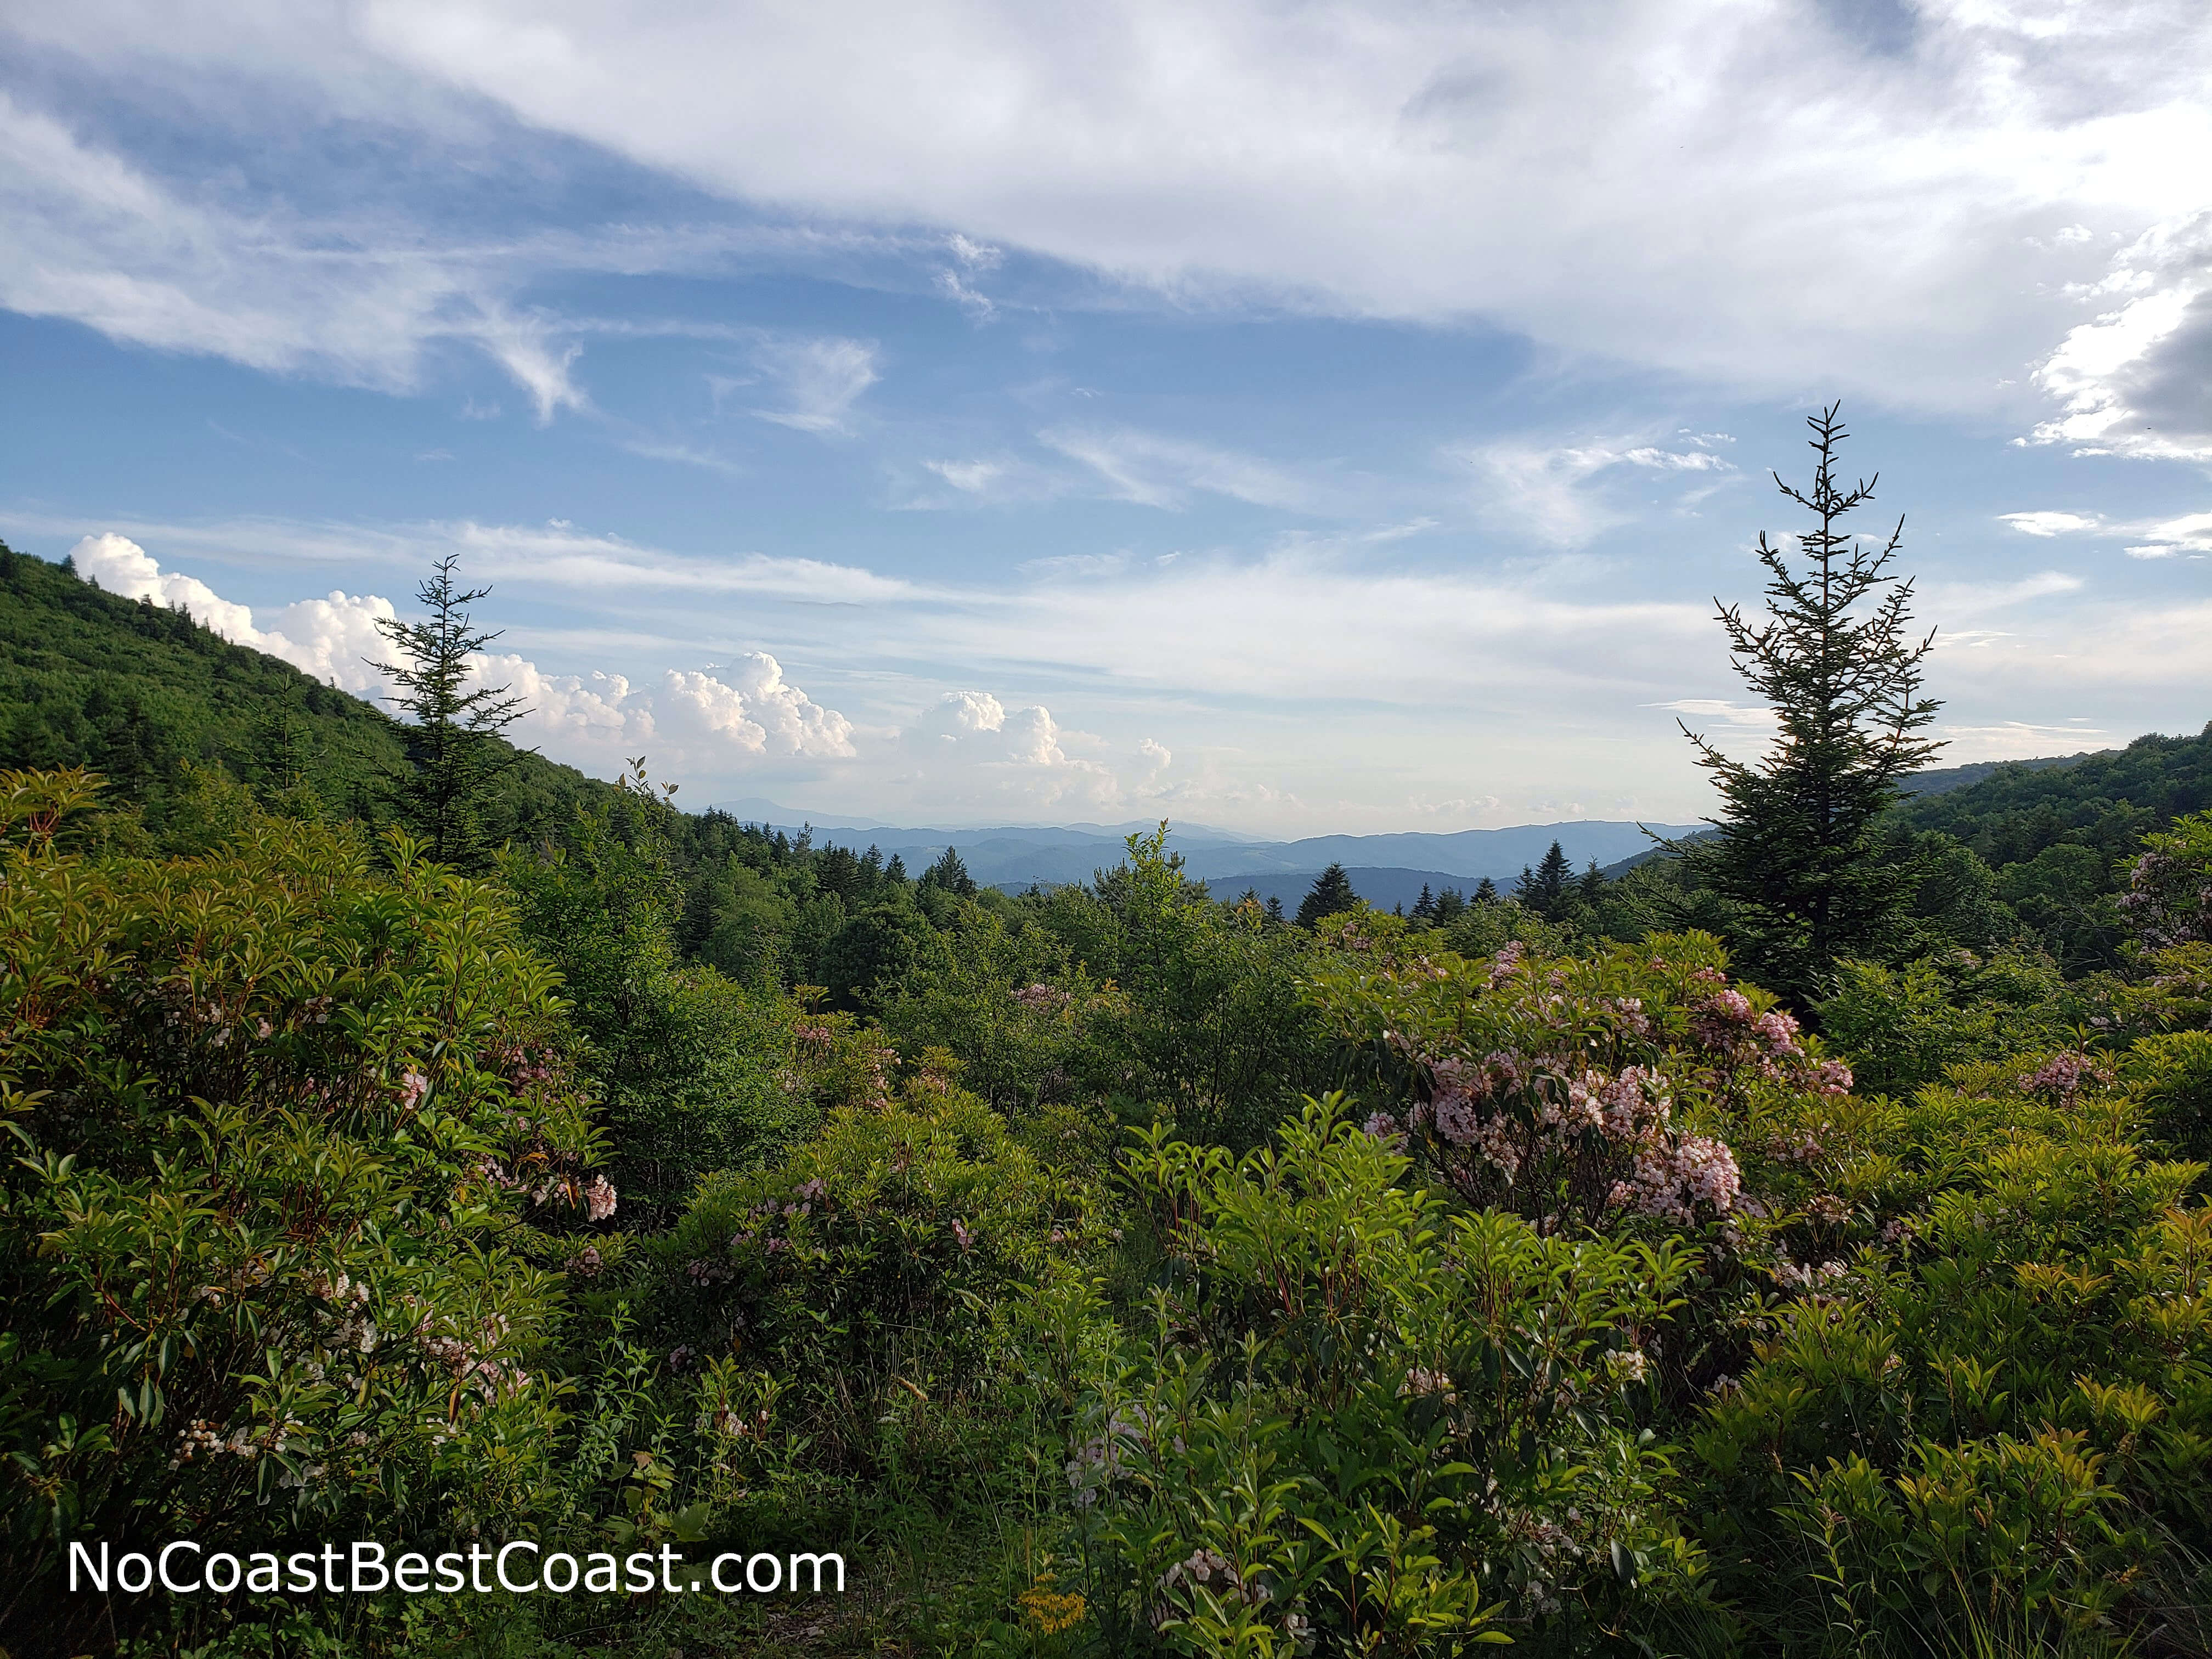 Rhododendrons blooming and Appalachian views